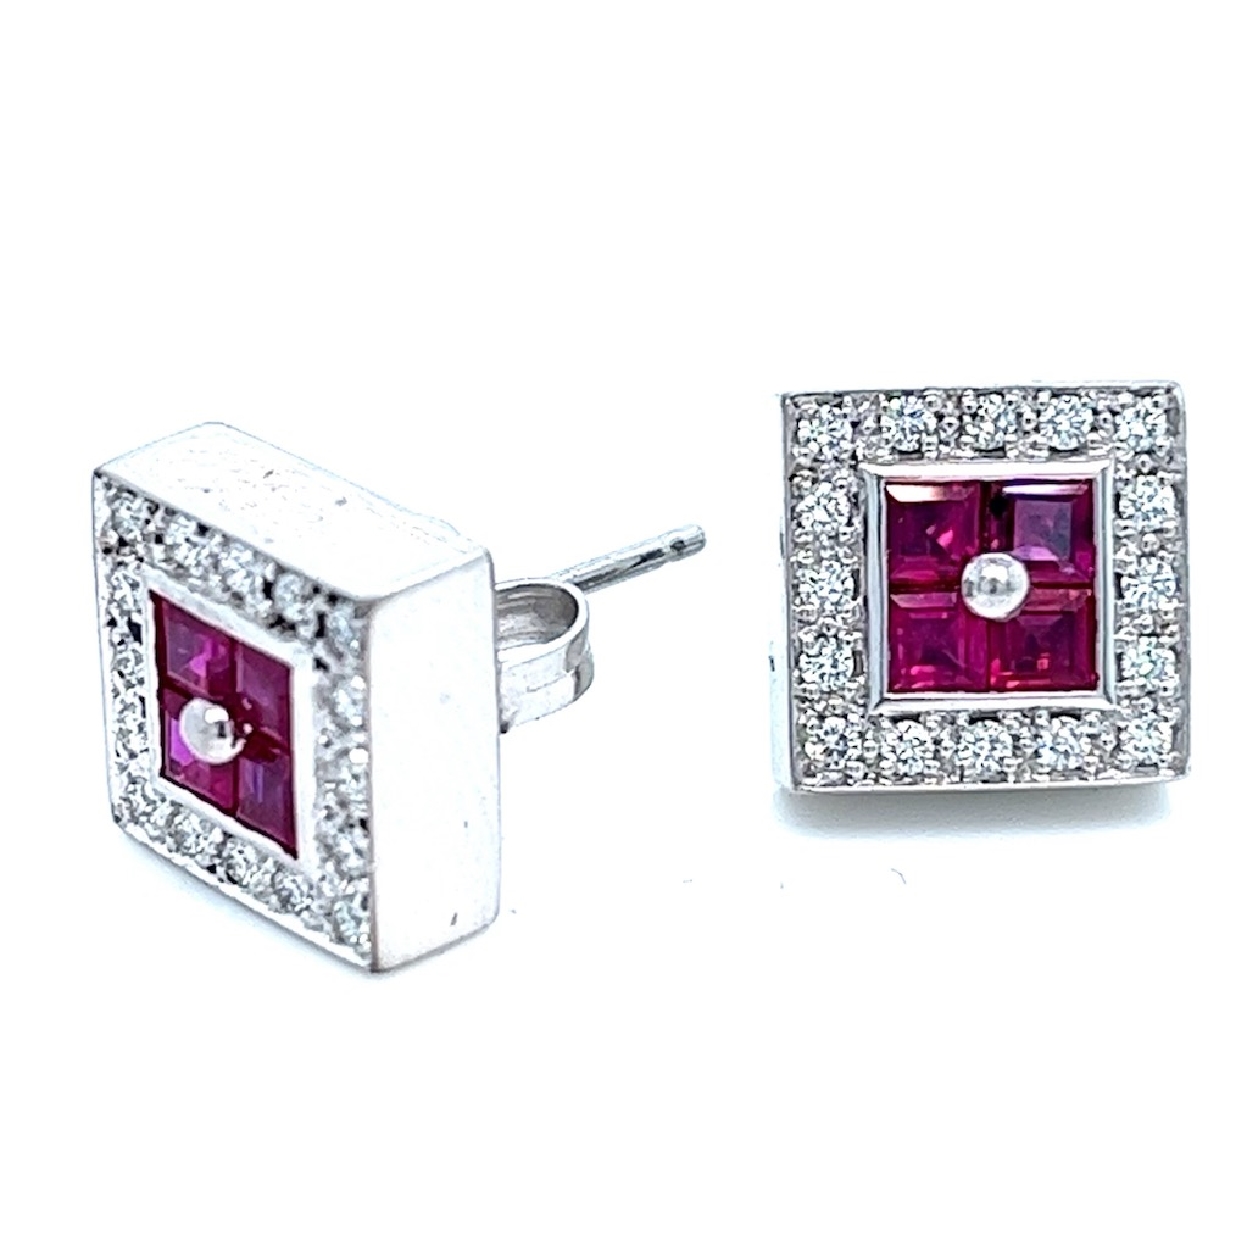 14K White Gold Square Cut Ruby Stud Earrings with Diamond Halo 